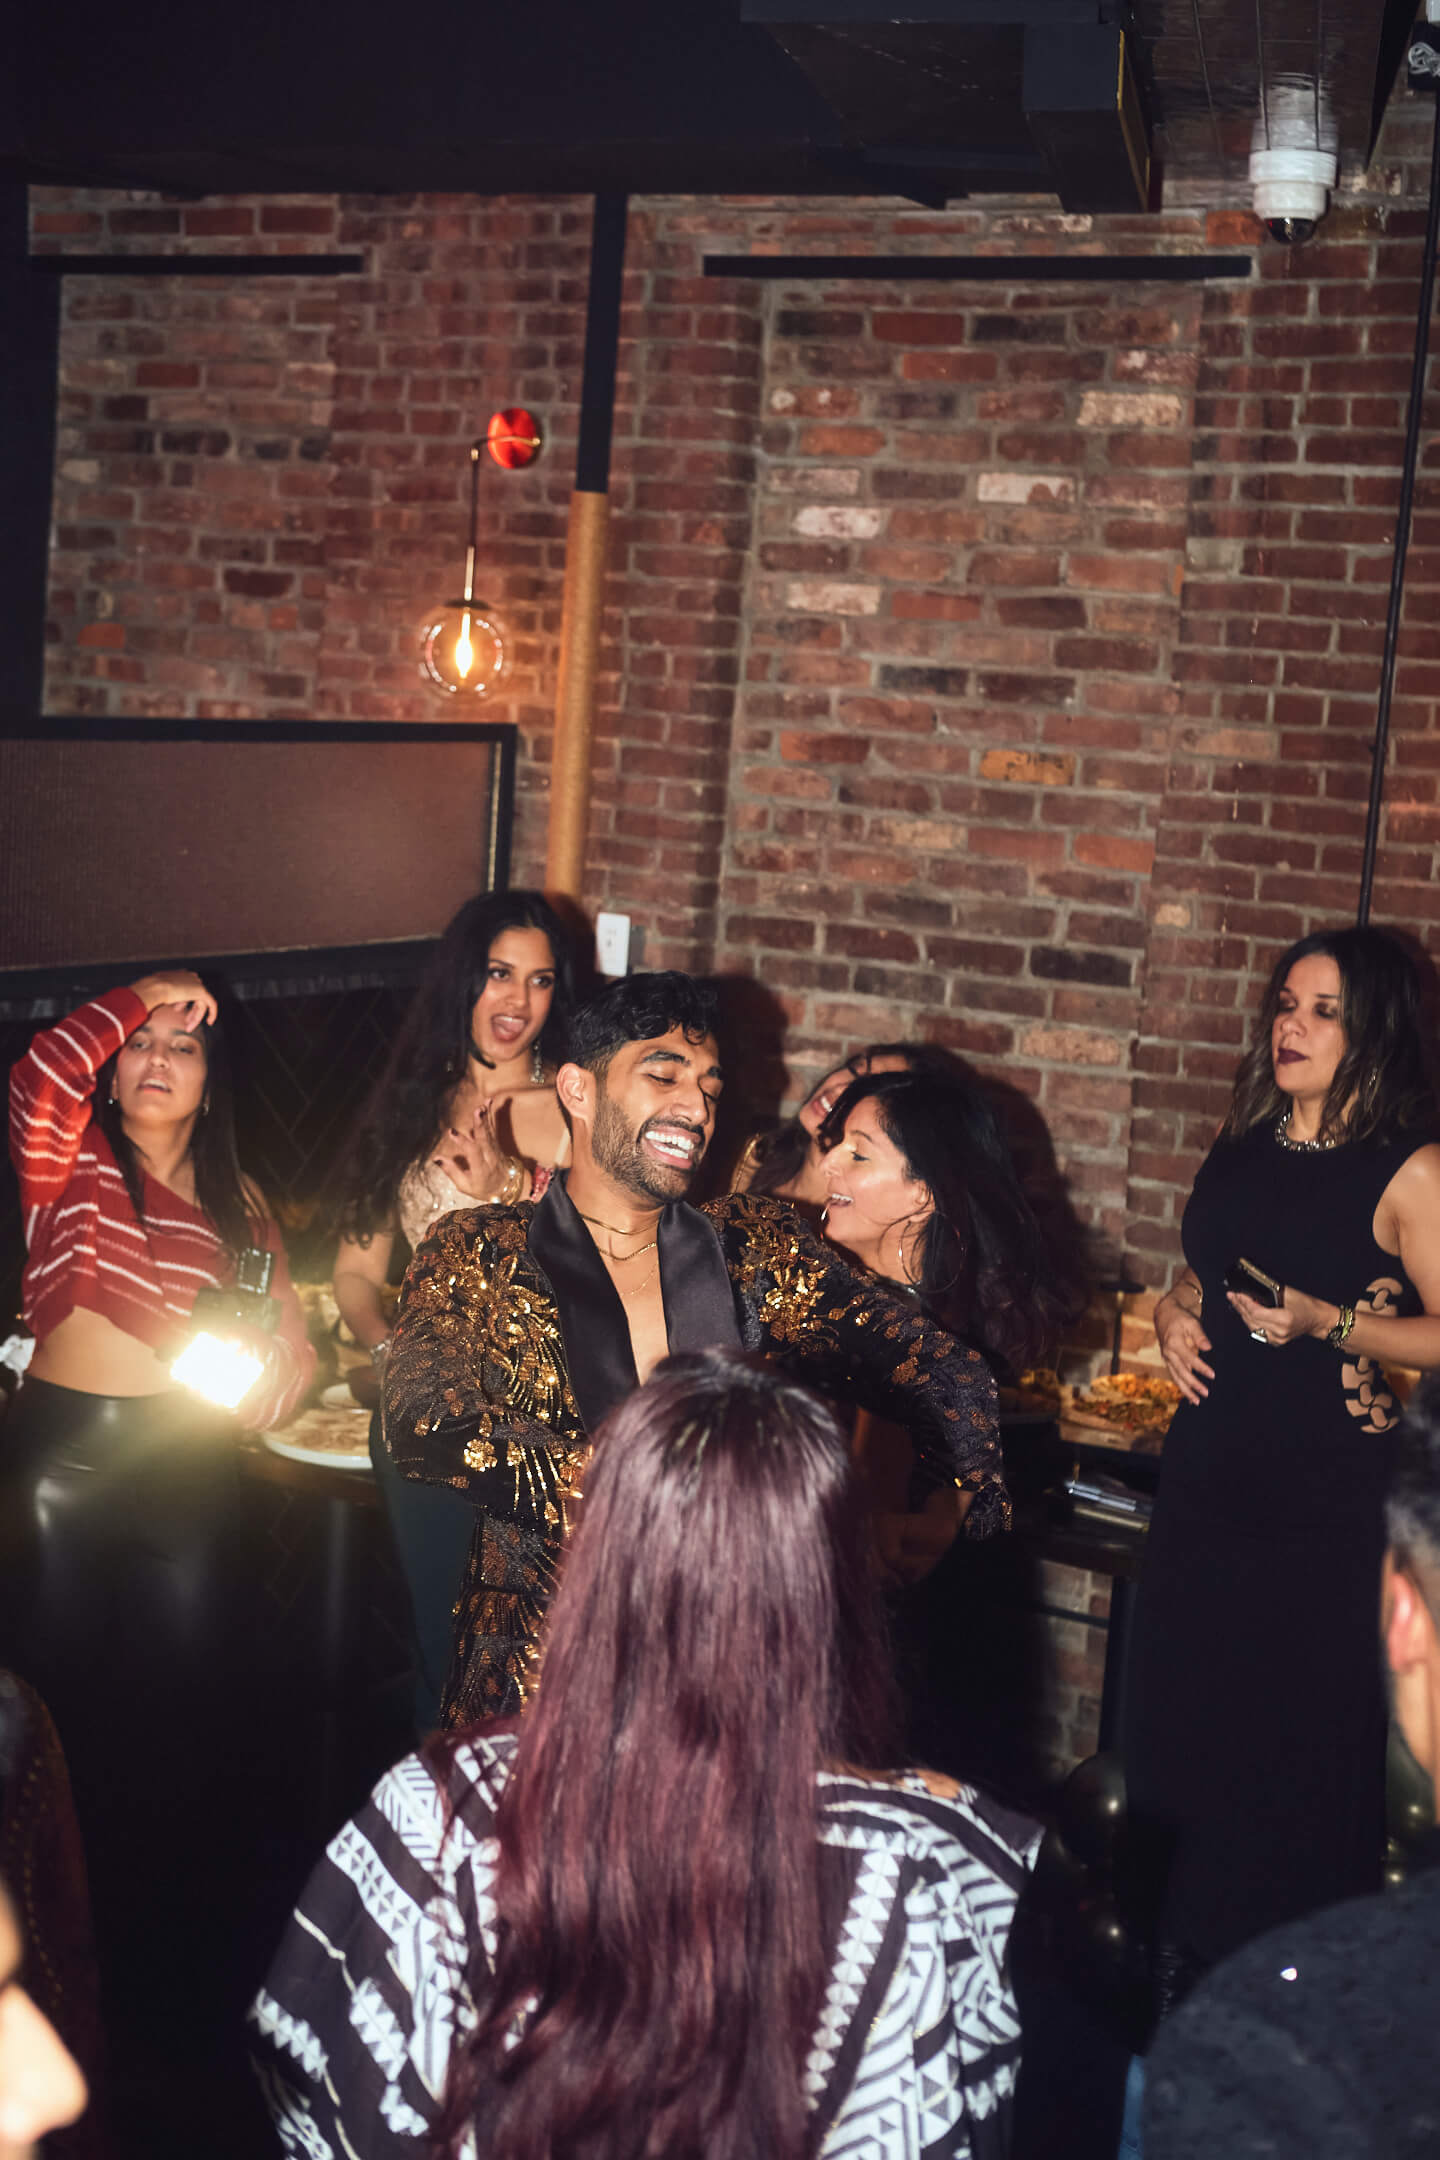 Zubair's Birthday Party - Jungly Restaurant - Event Photography - Lifestyle Photography - Long Island City, New York